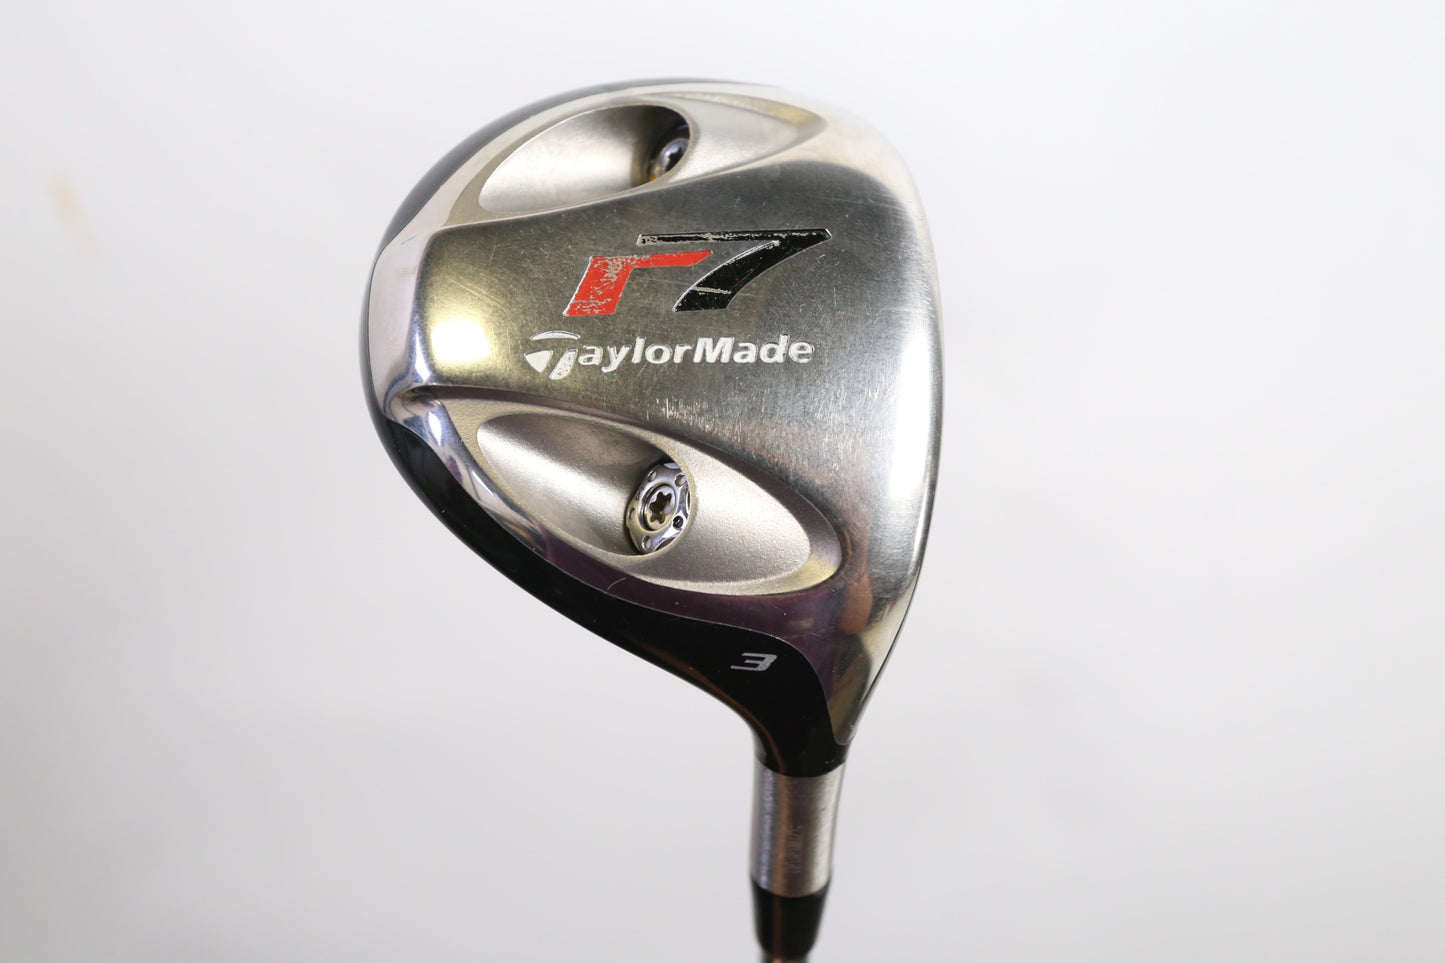 Used TaylorMade r7 Steel TP 3-Wood - Right-Handed - 15 Degrees - Stiff Flex